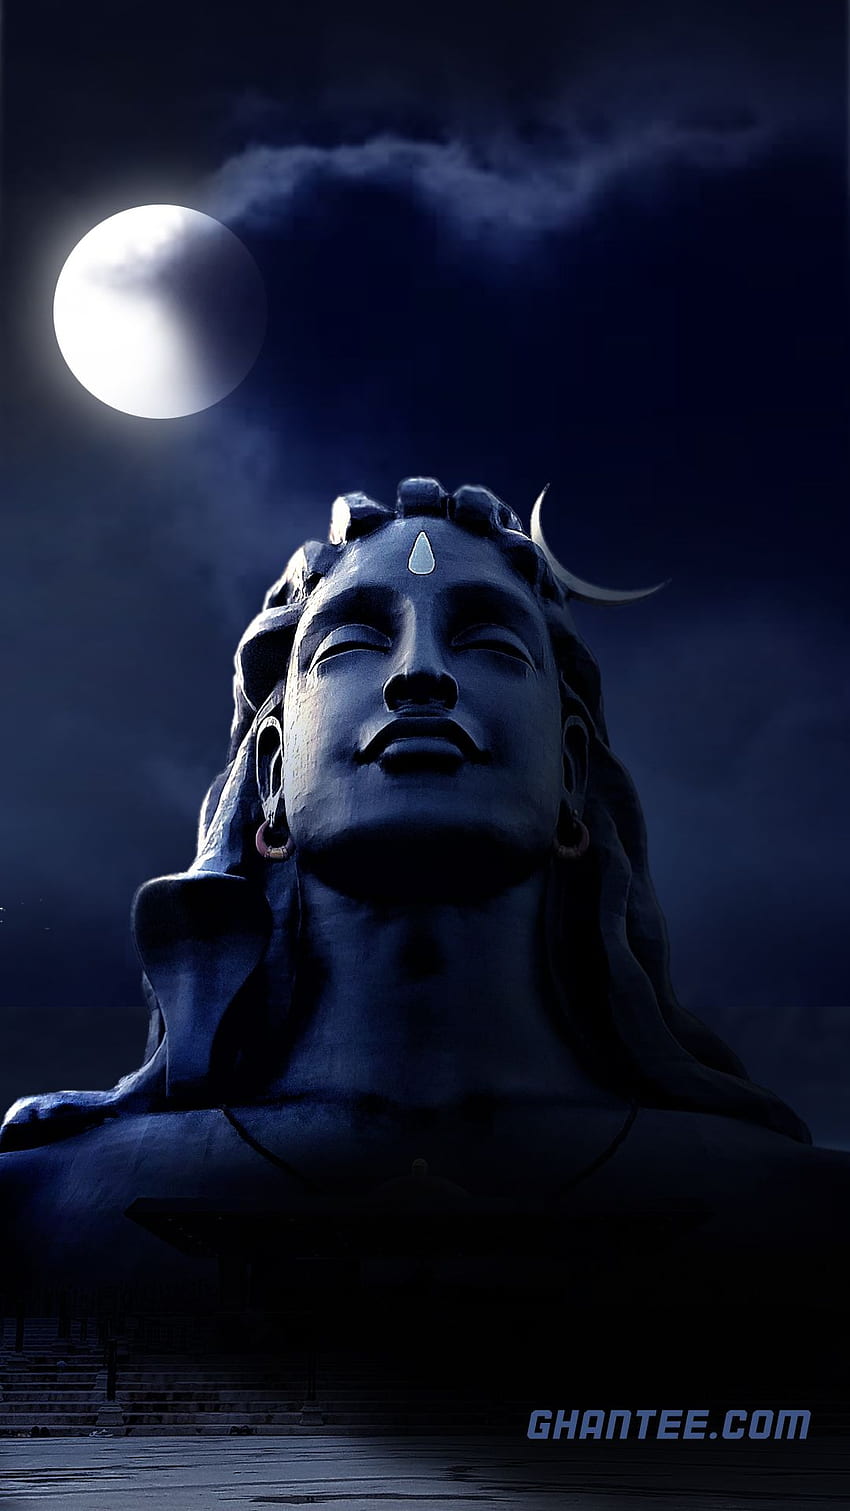 Best lord shiva for mobile devices. Shiva , of lord shiva, Lord ...